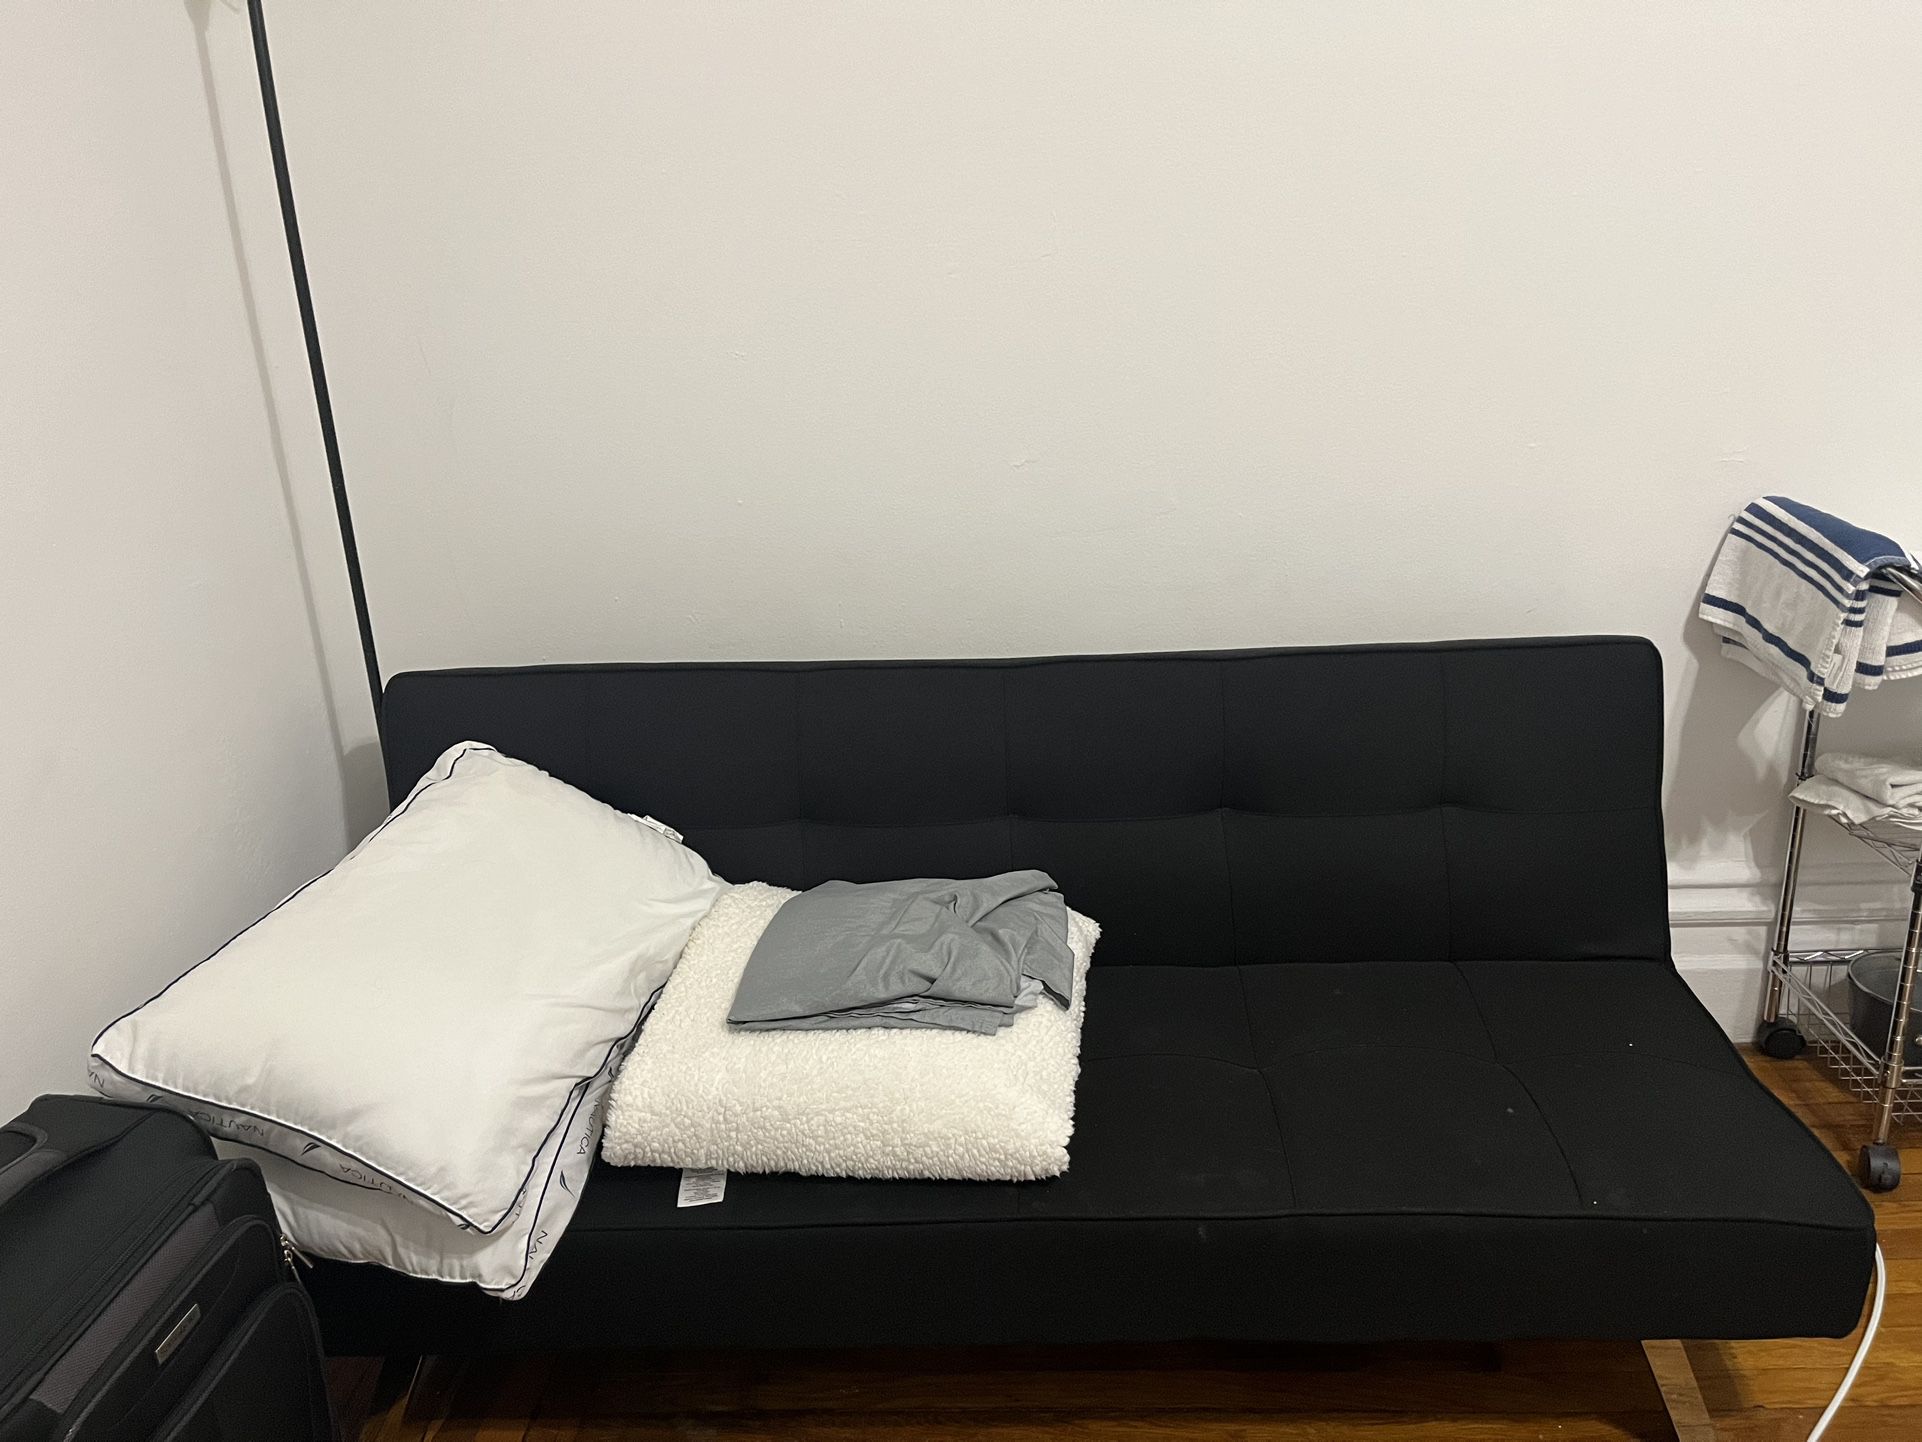 Futon (couch / bed)